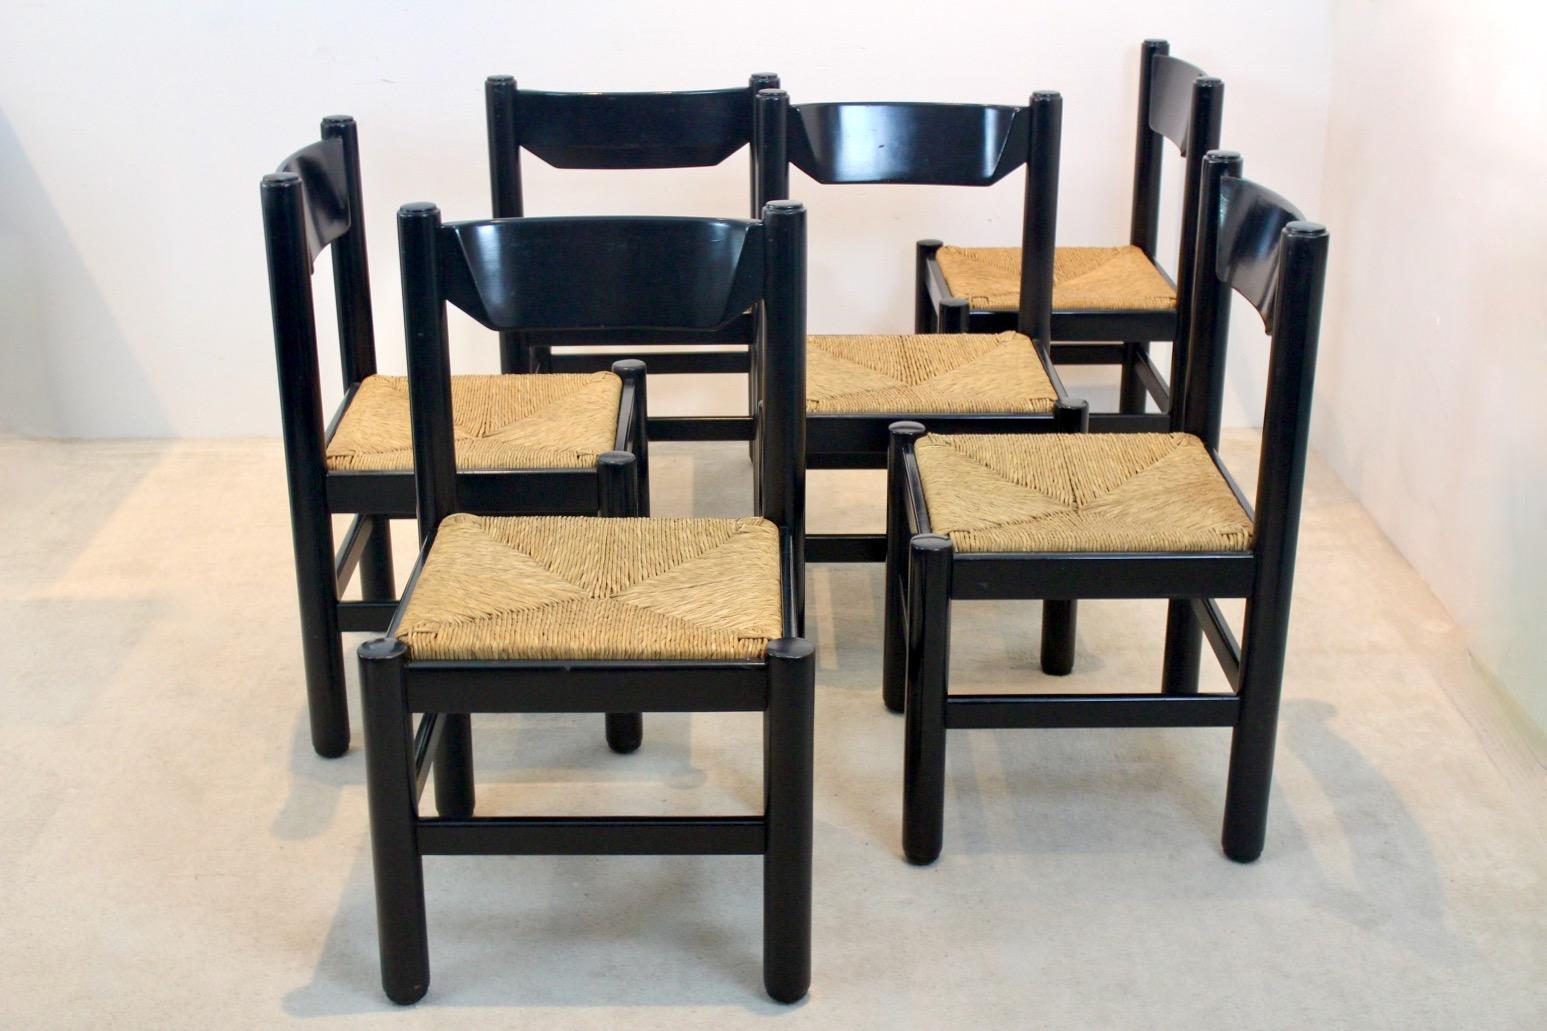 Very practical and original mid century dining table with six matching chairs attributed to Vico Magistretti, produced by Cassina (attr.). Made in Italy, dating from the ‘60s. This black solid beechwood table comes with very comfortable chairs with